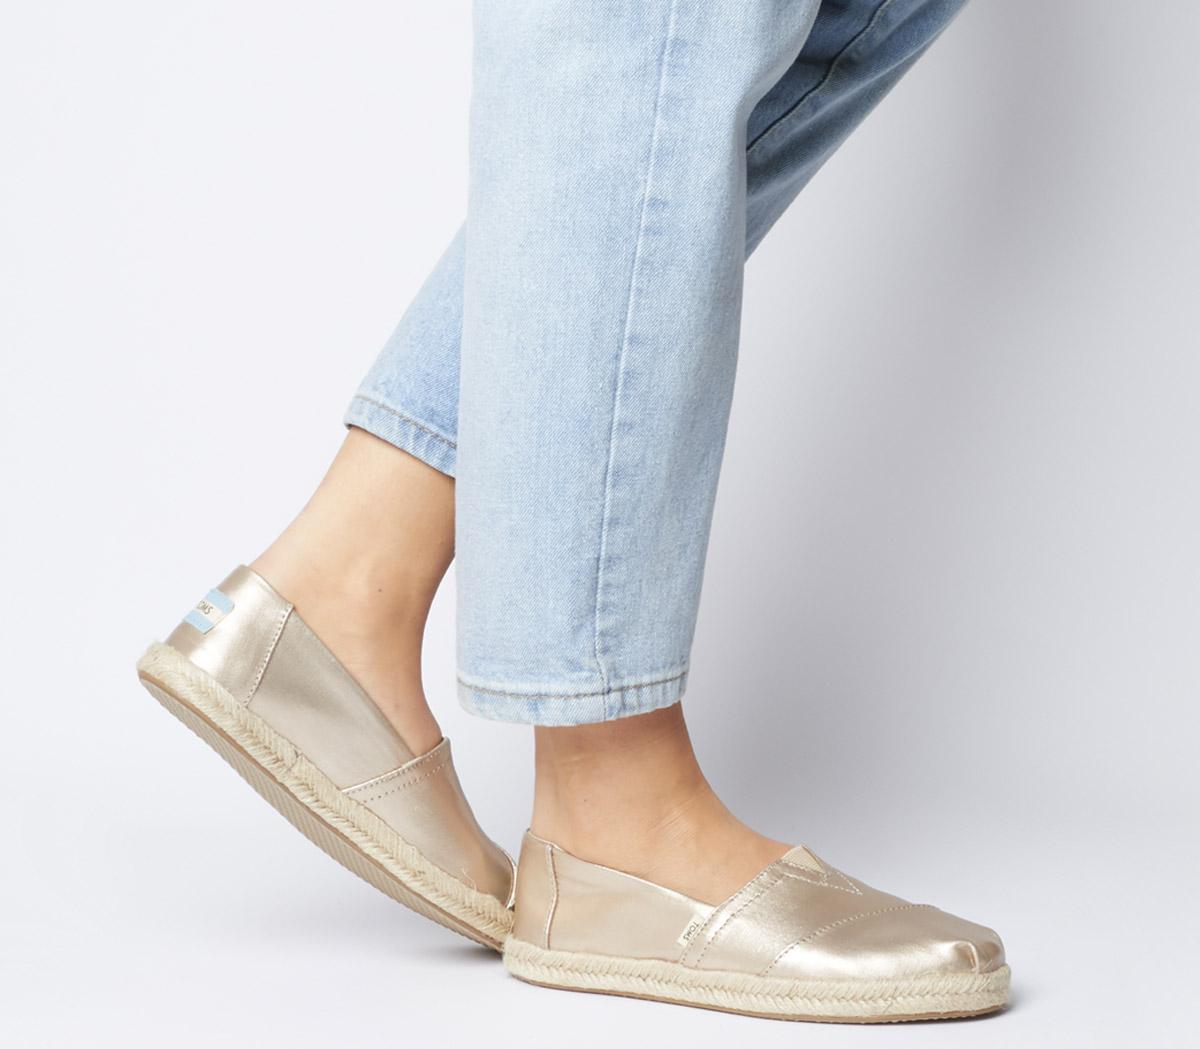 toms rose gold shoes